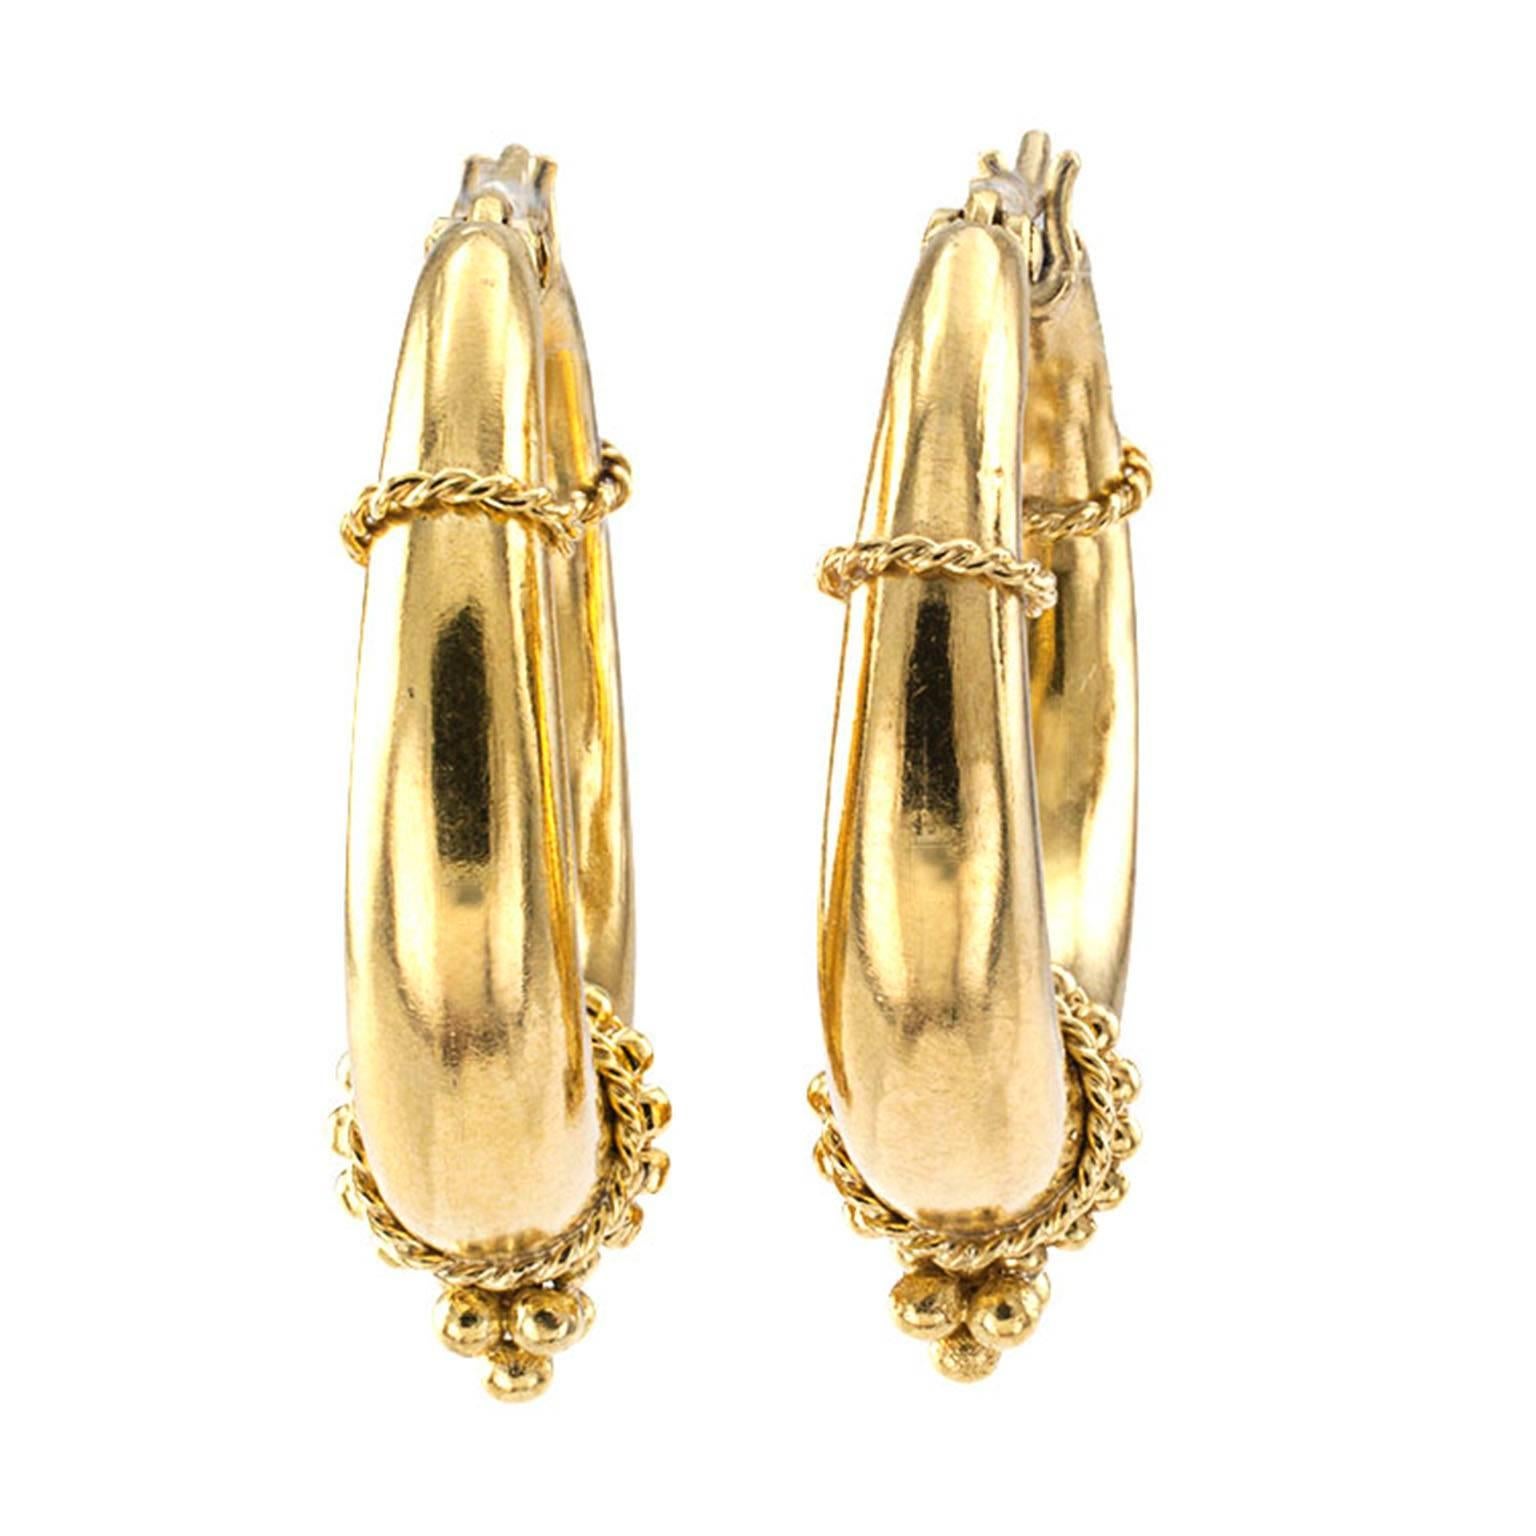 Temple St Clair 18 Karat Gold Hoop Earrings

Modern and  attractive gold hoops with an ancient flair telling in part the story of Temple St. Clair's design inspiration, which according to her bio is driven by an artist's heart and an explorer's